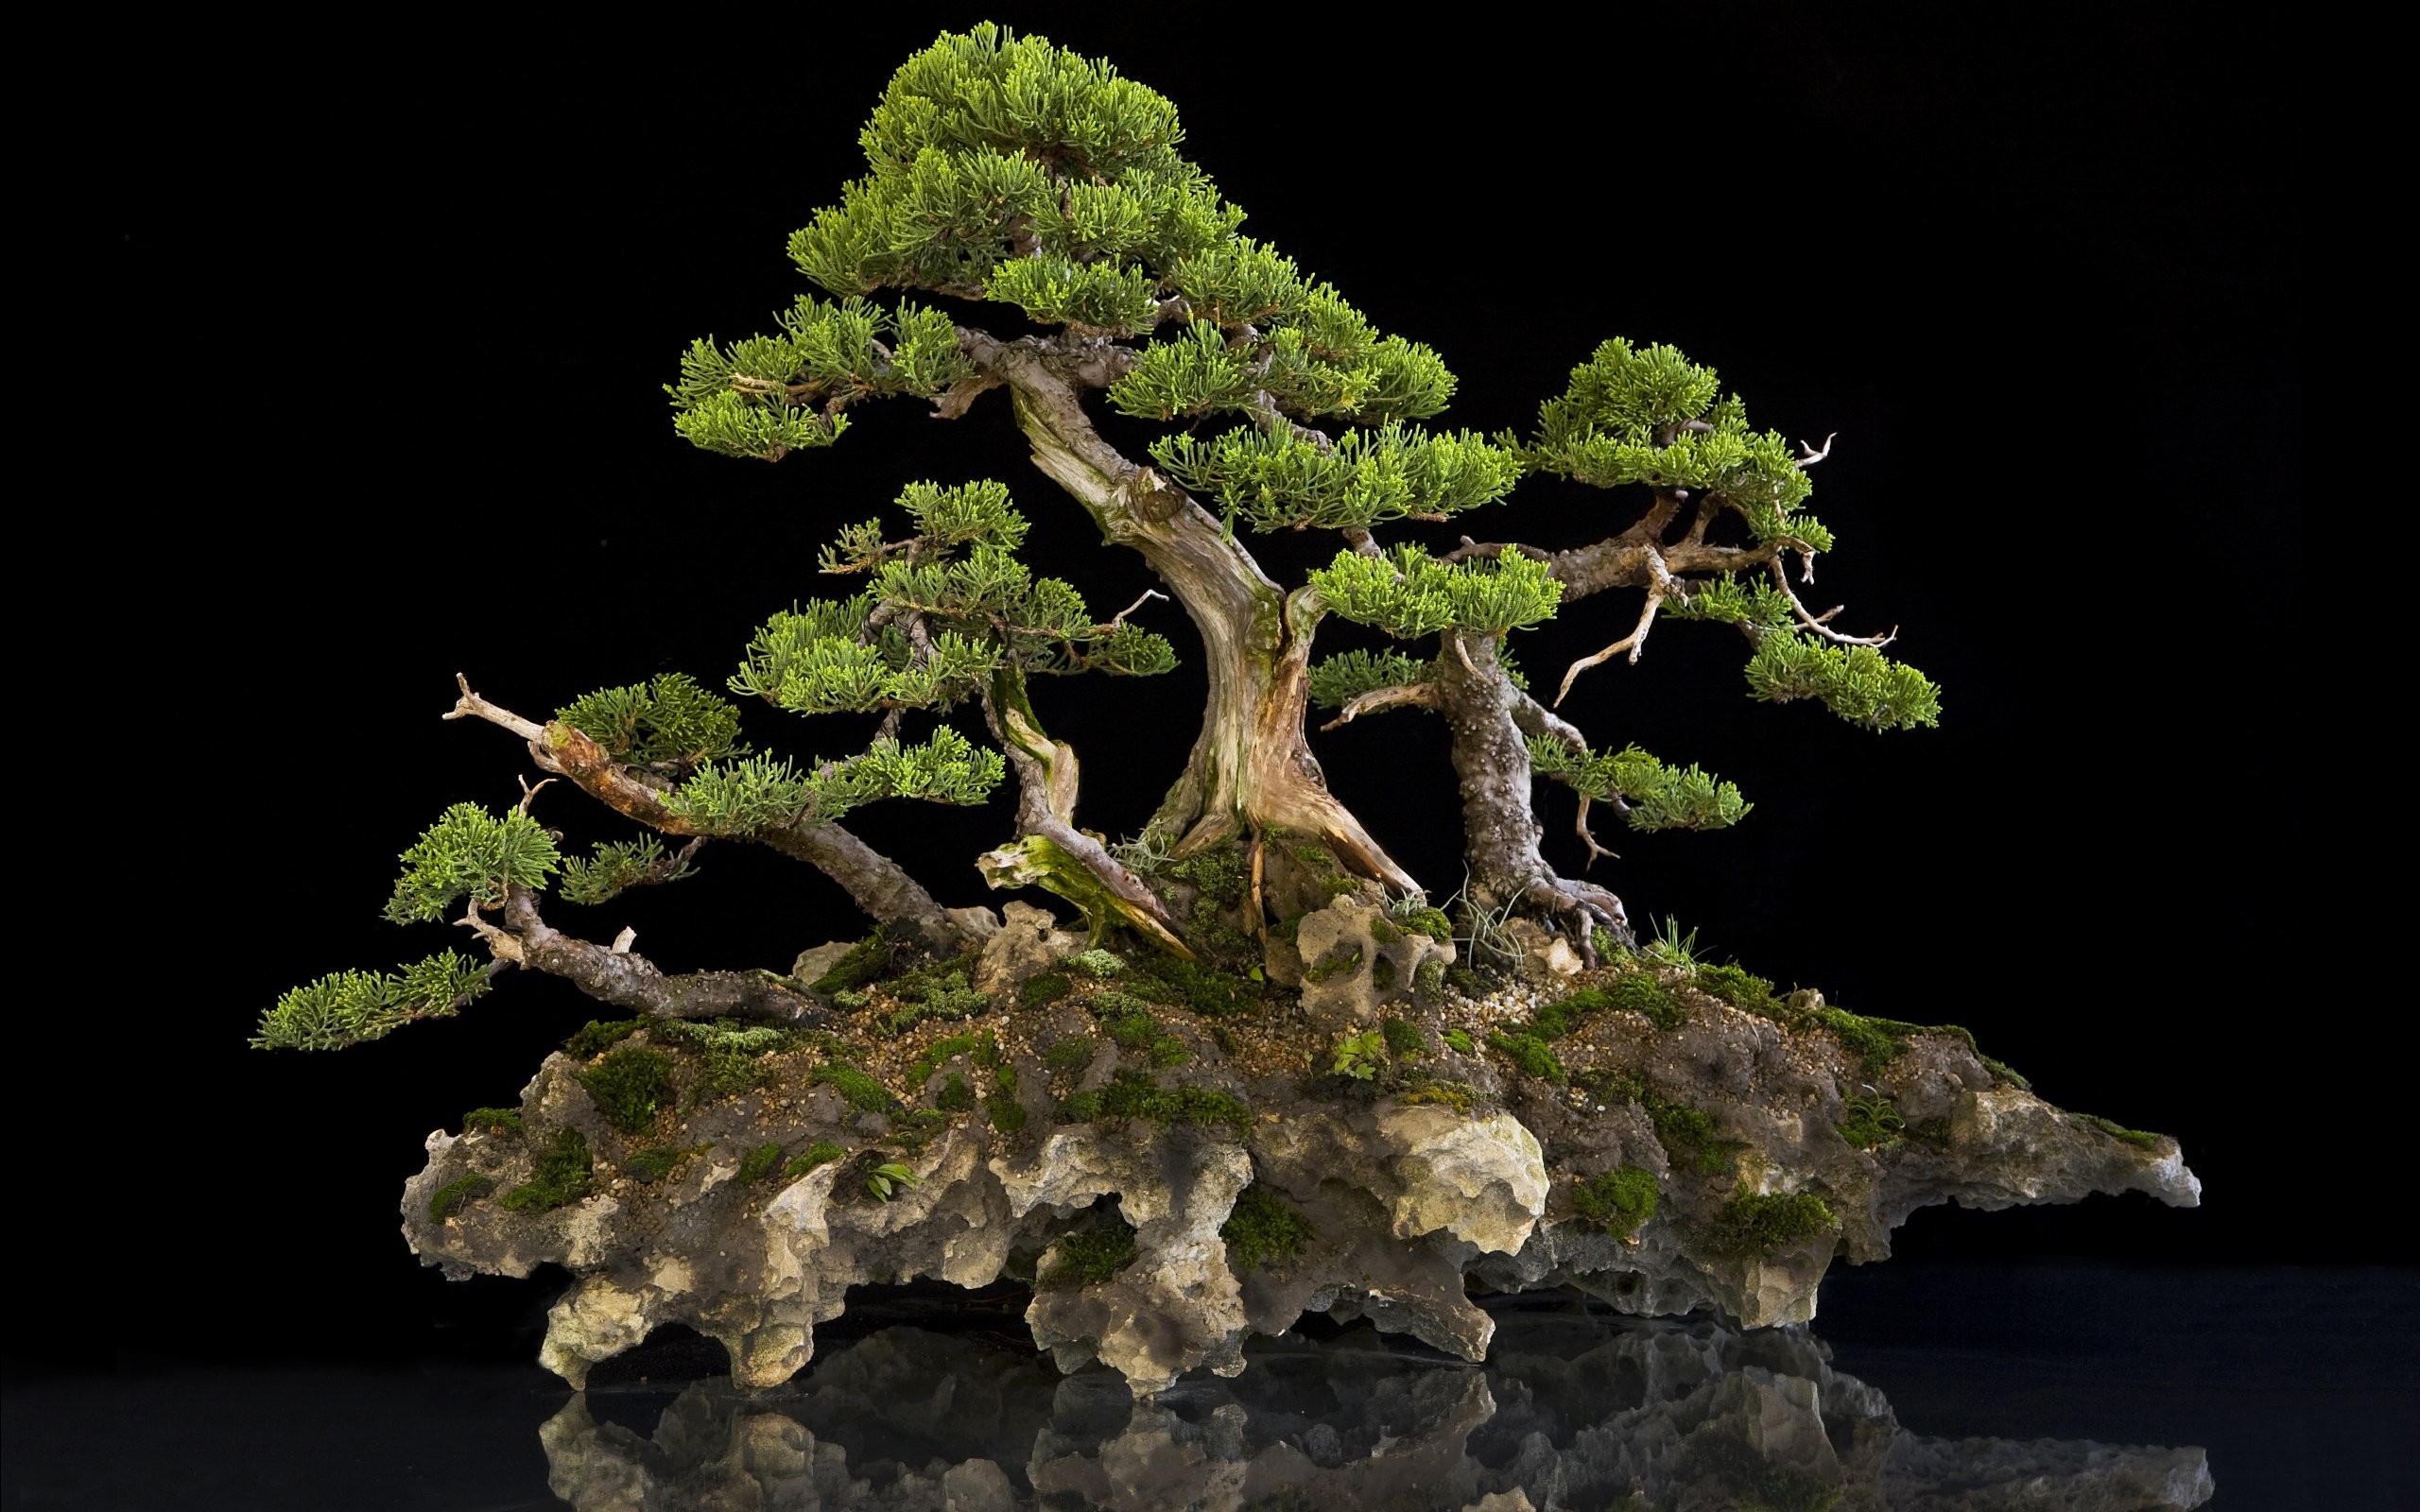 Buy Avikalp Awi3288 Bonsai Tree Nature Full HD 3D Scenery Wallpaper Or Wall  Sticker Vinyl365cm x 304cm Online at Low Prices in India  Amazonin